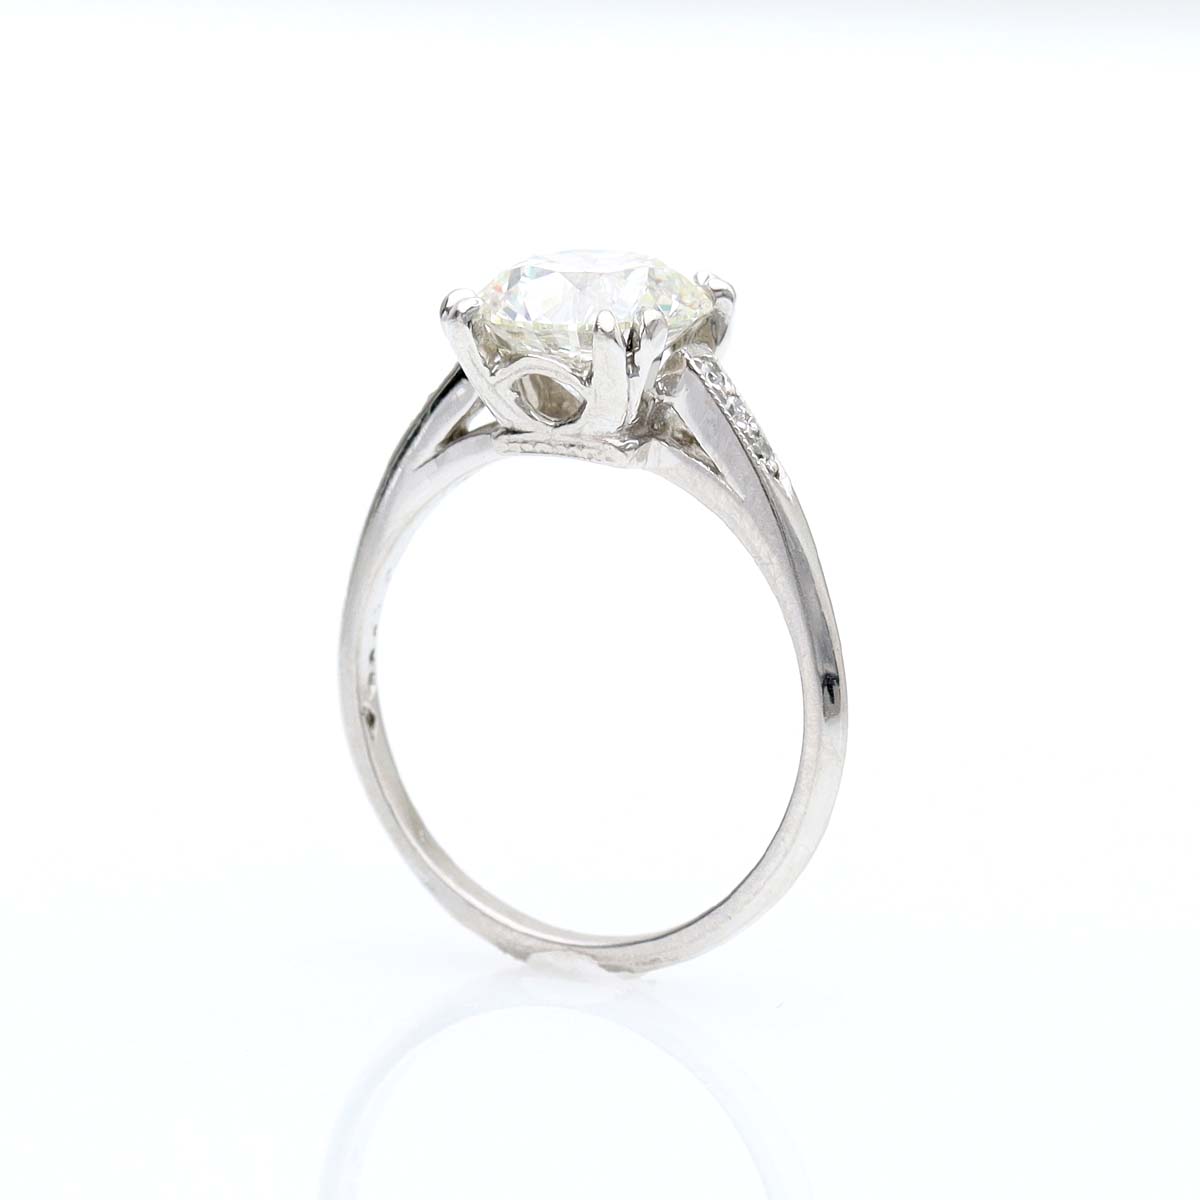 Platinum Reproduction of a 1930s Era Engagement ring #3104-11